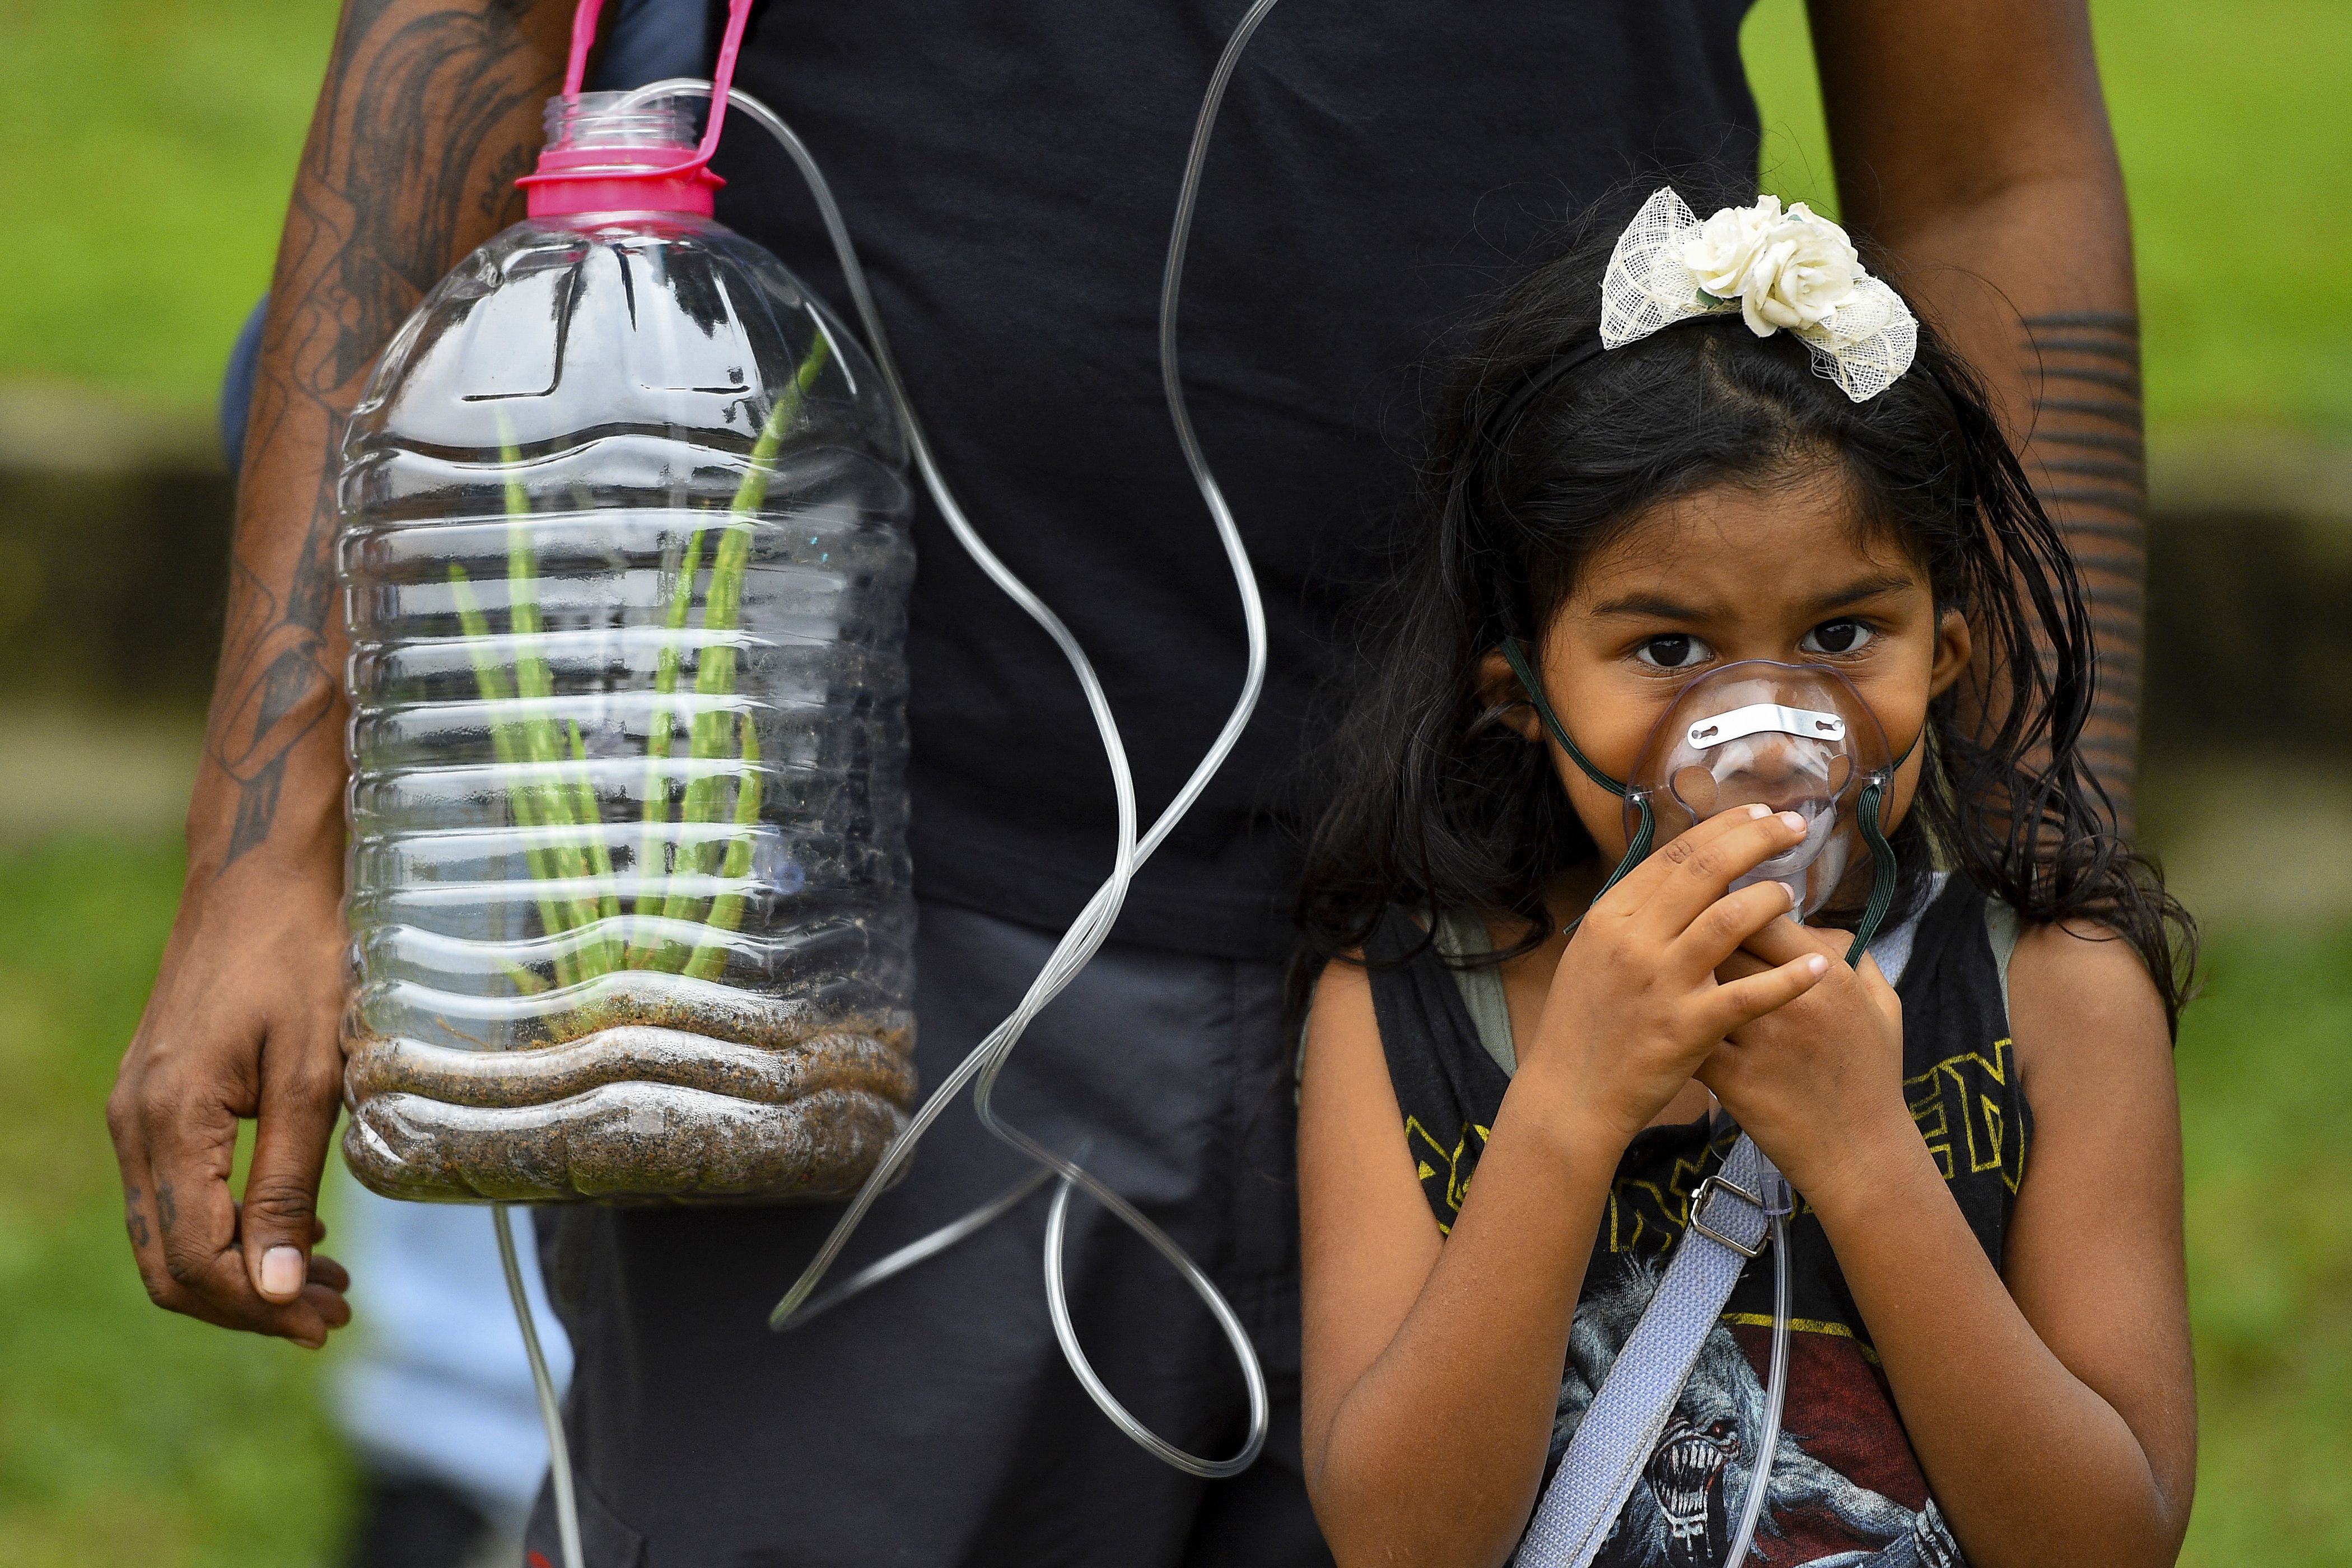 A young protester takes part in a climate demonstration in Colombo, Sri Lanka, in March this year. Photo: ISHARA S. KODIKARA/AFP via Getty Images